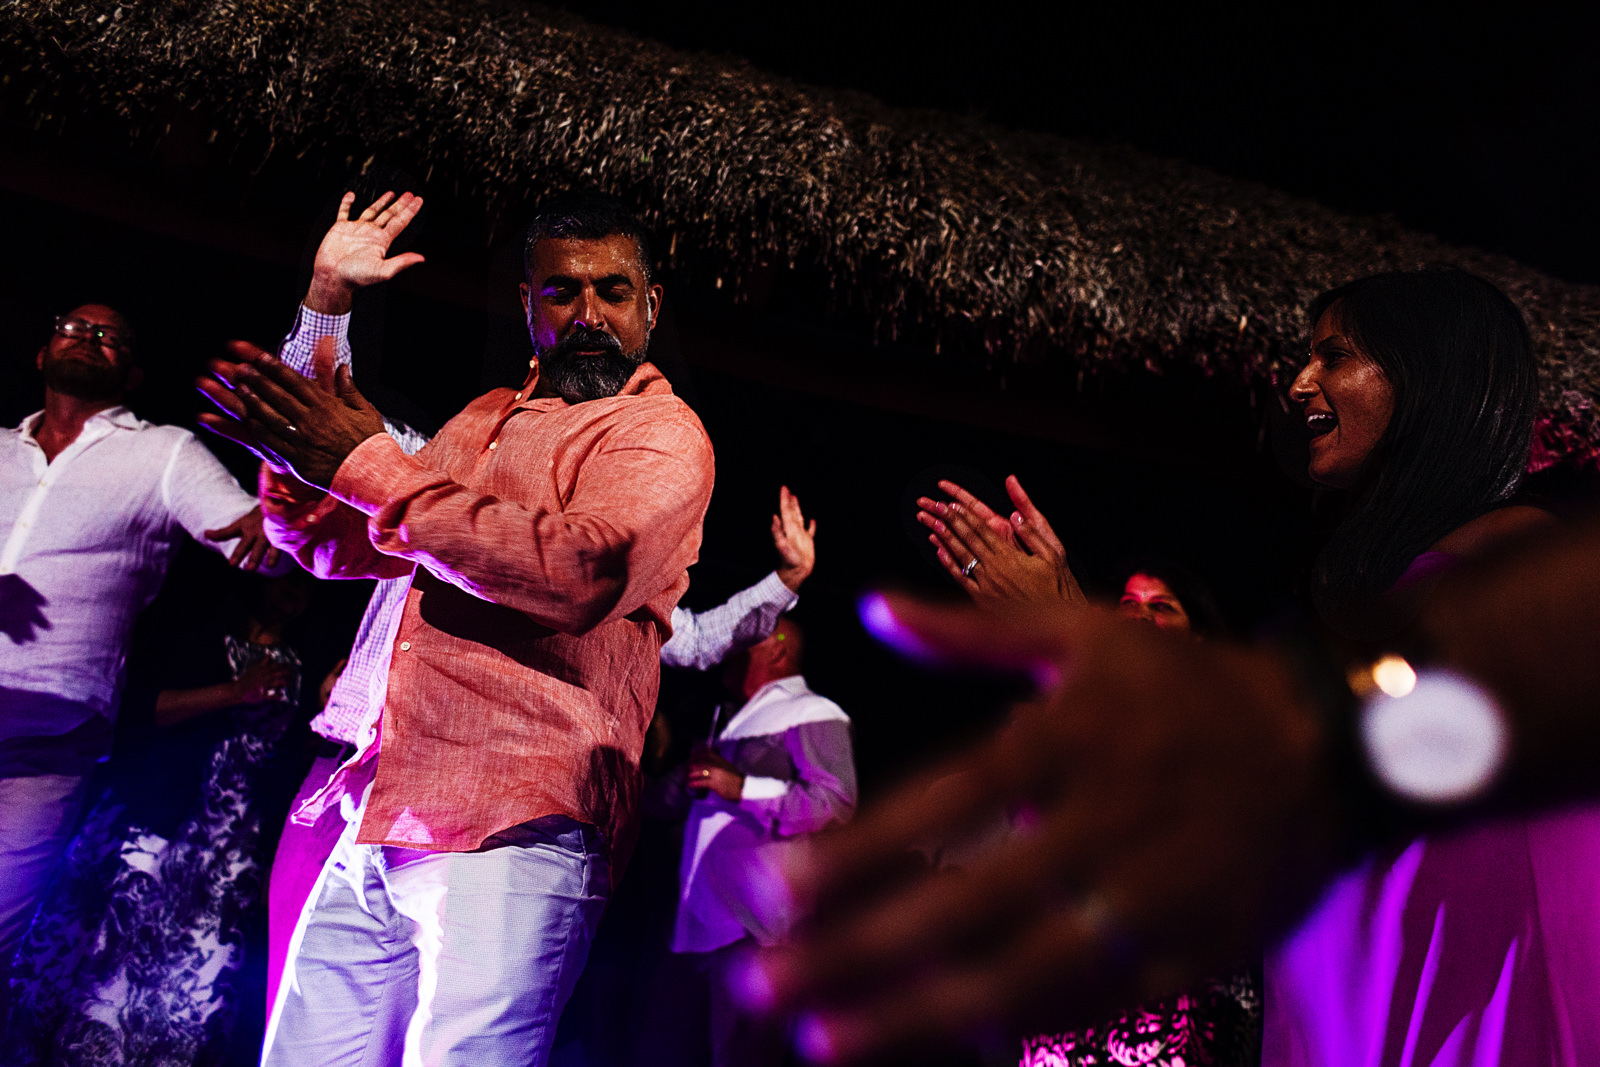 Groom dances hindi music style around the wedding guests clapping